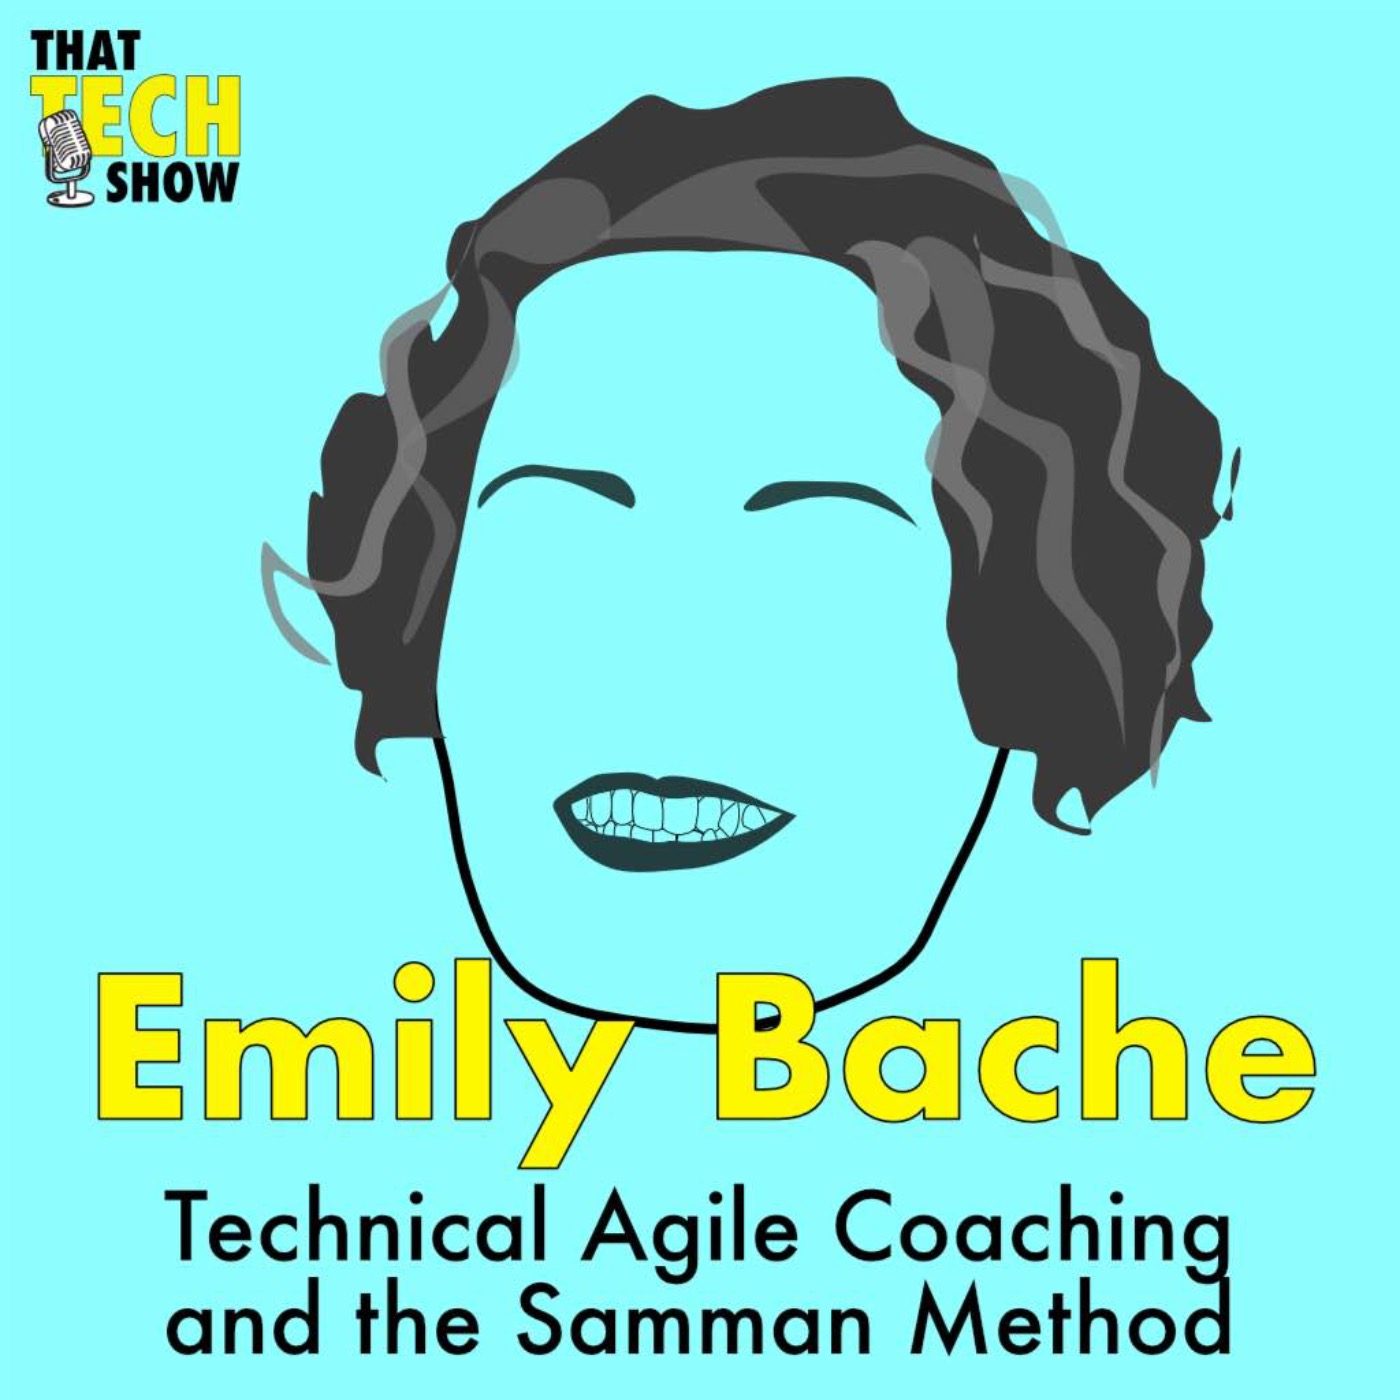 Episode 39 - Technical Agile Coaching and the Samman Method with Emily Bache